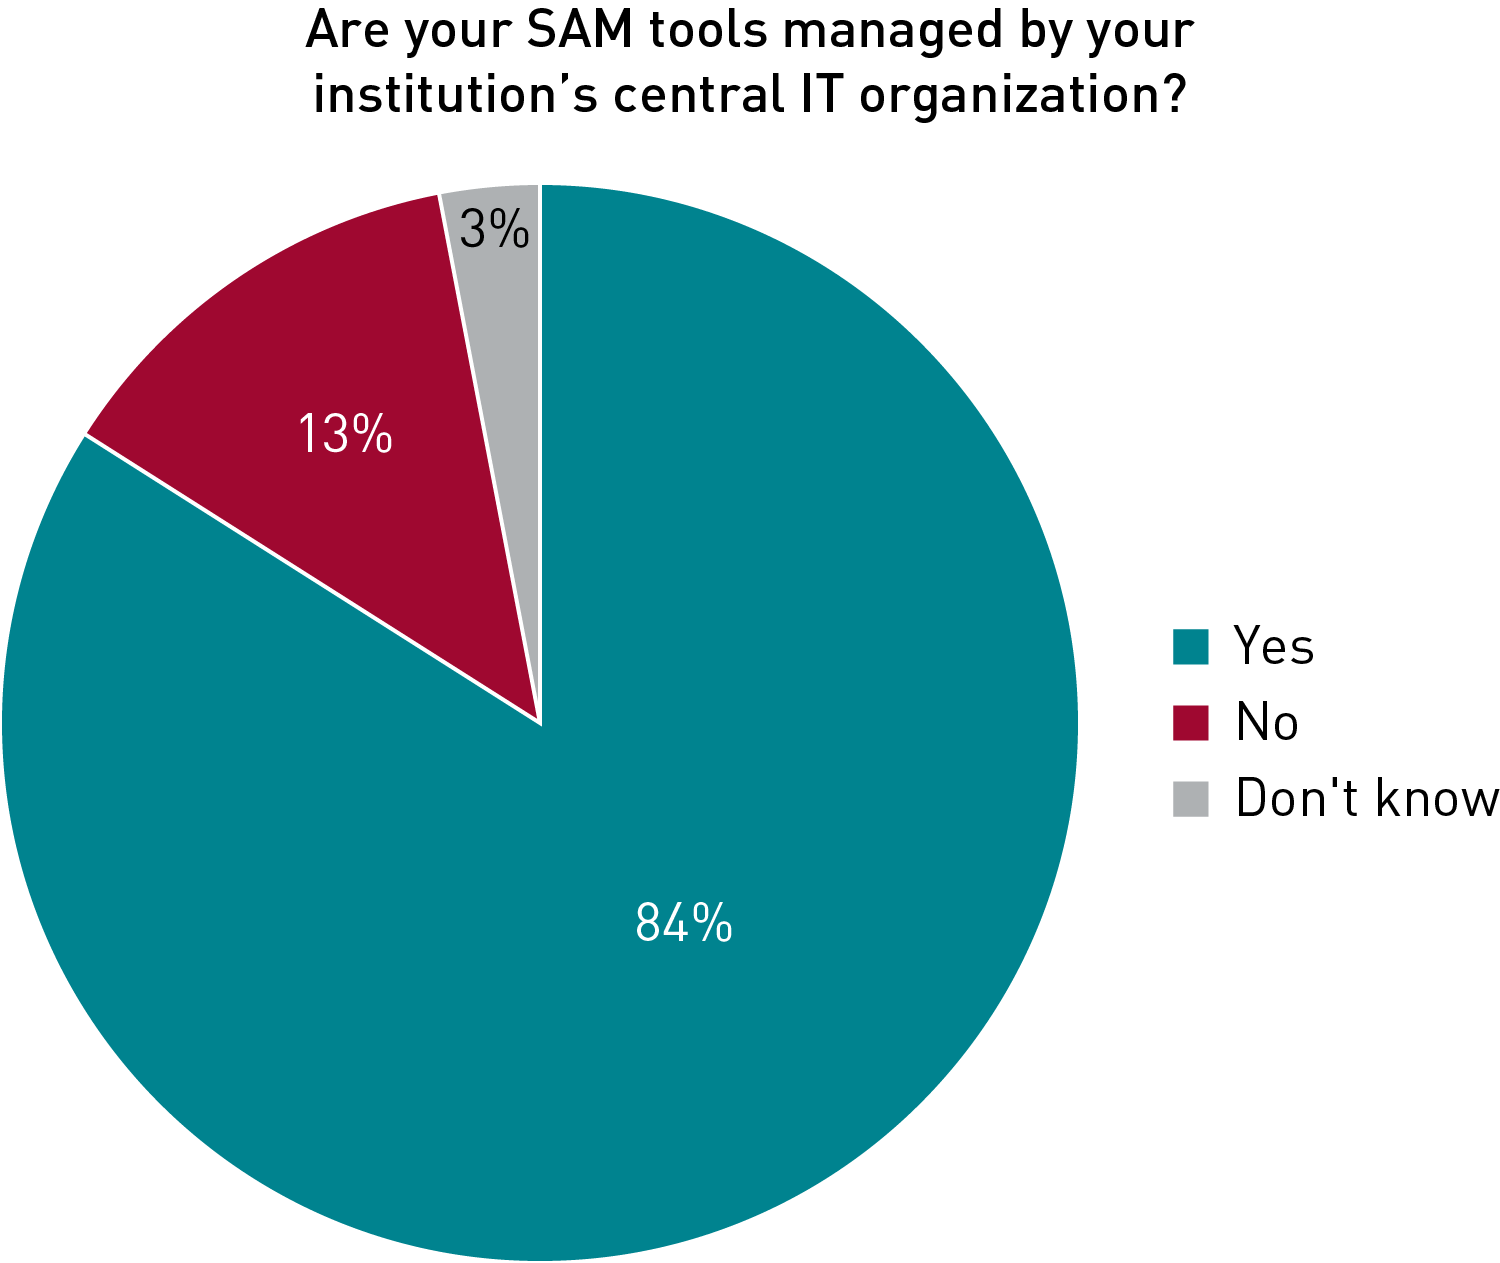 Pie chart showing whether SAM tools are managed by central IT organization: Yes (84%), No (13%), and Don’t know (3%). 